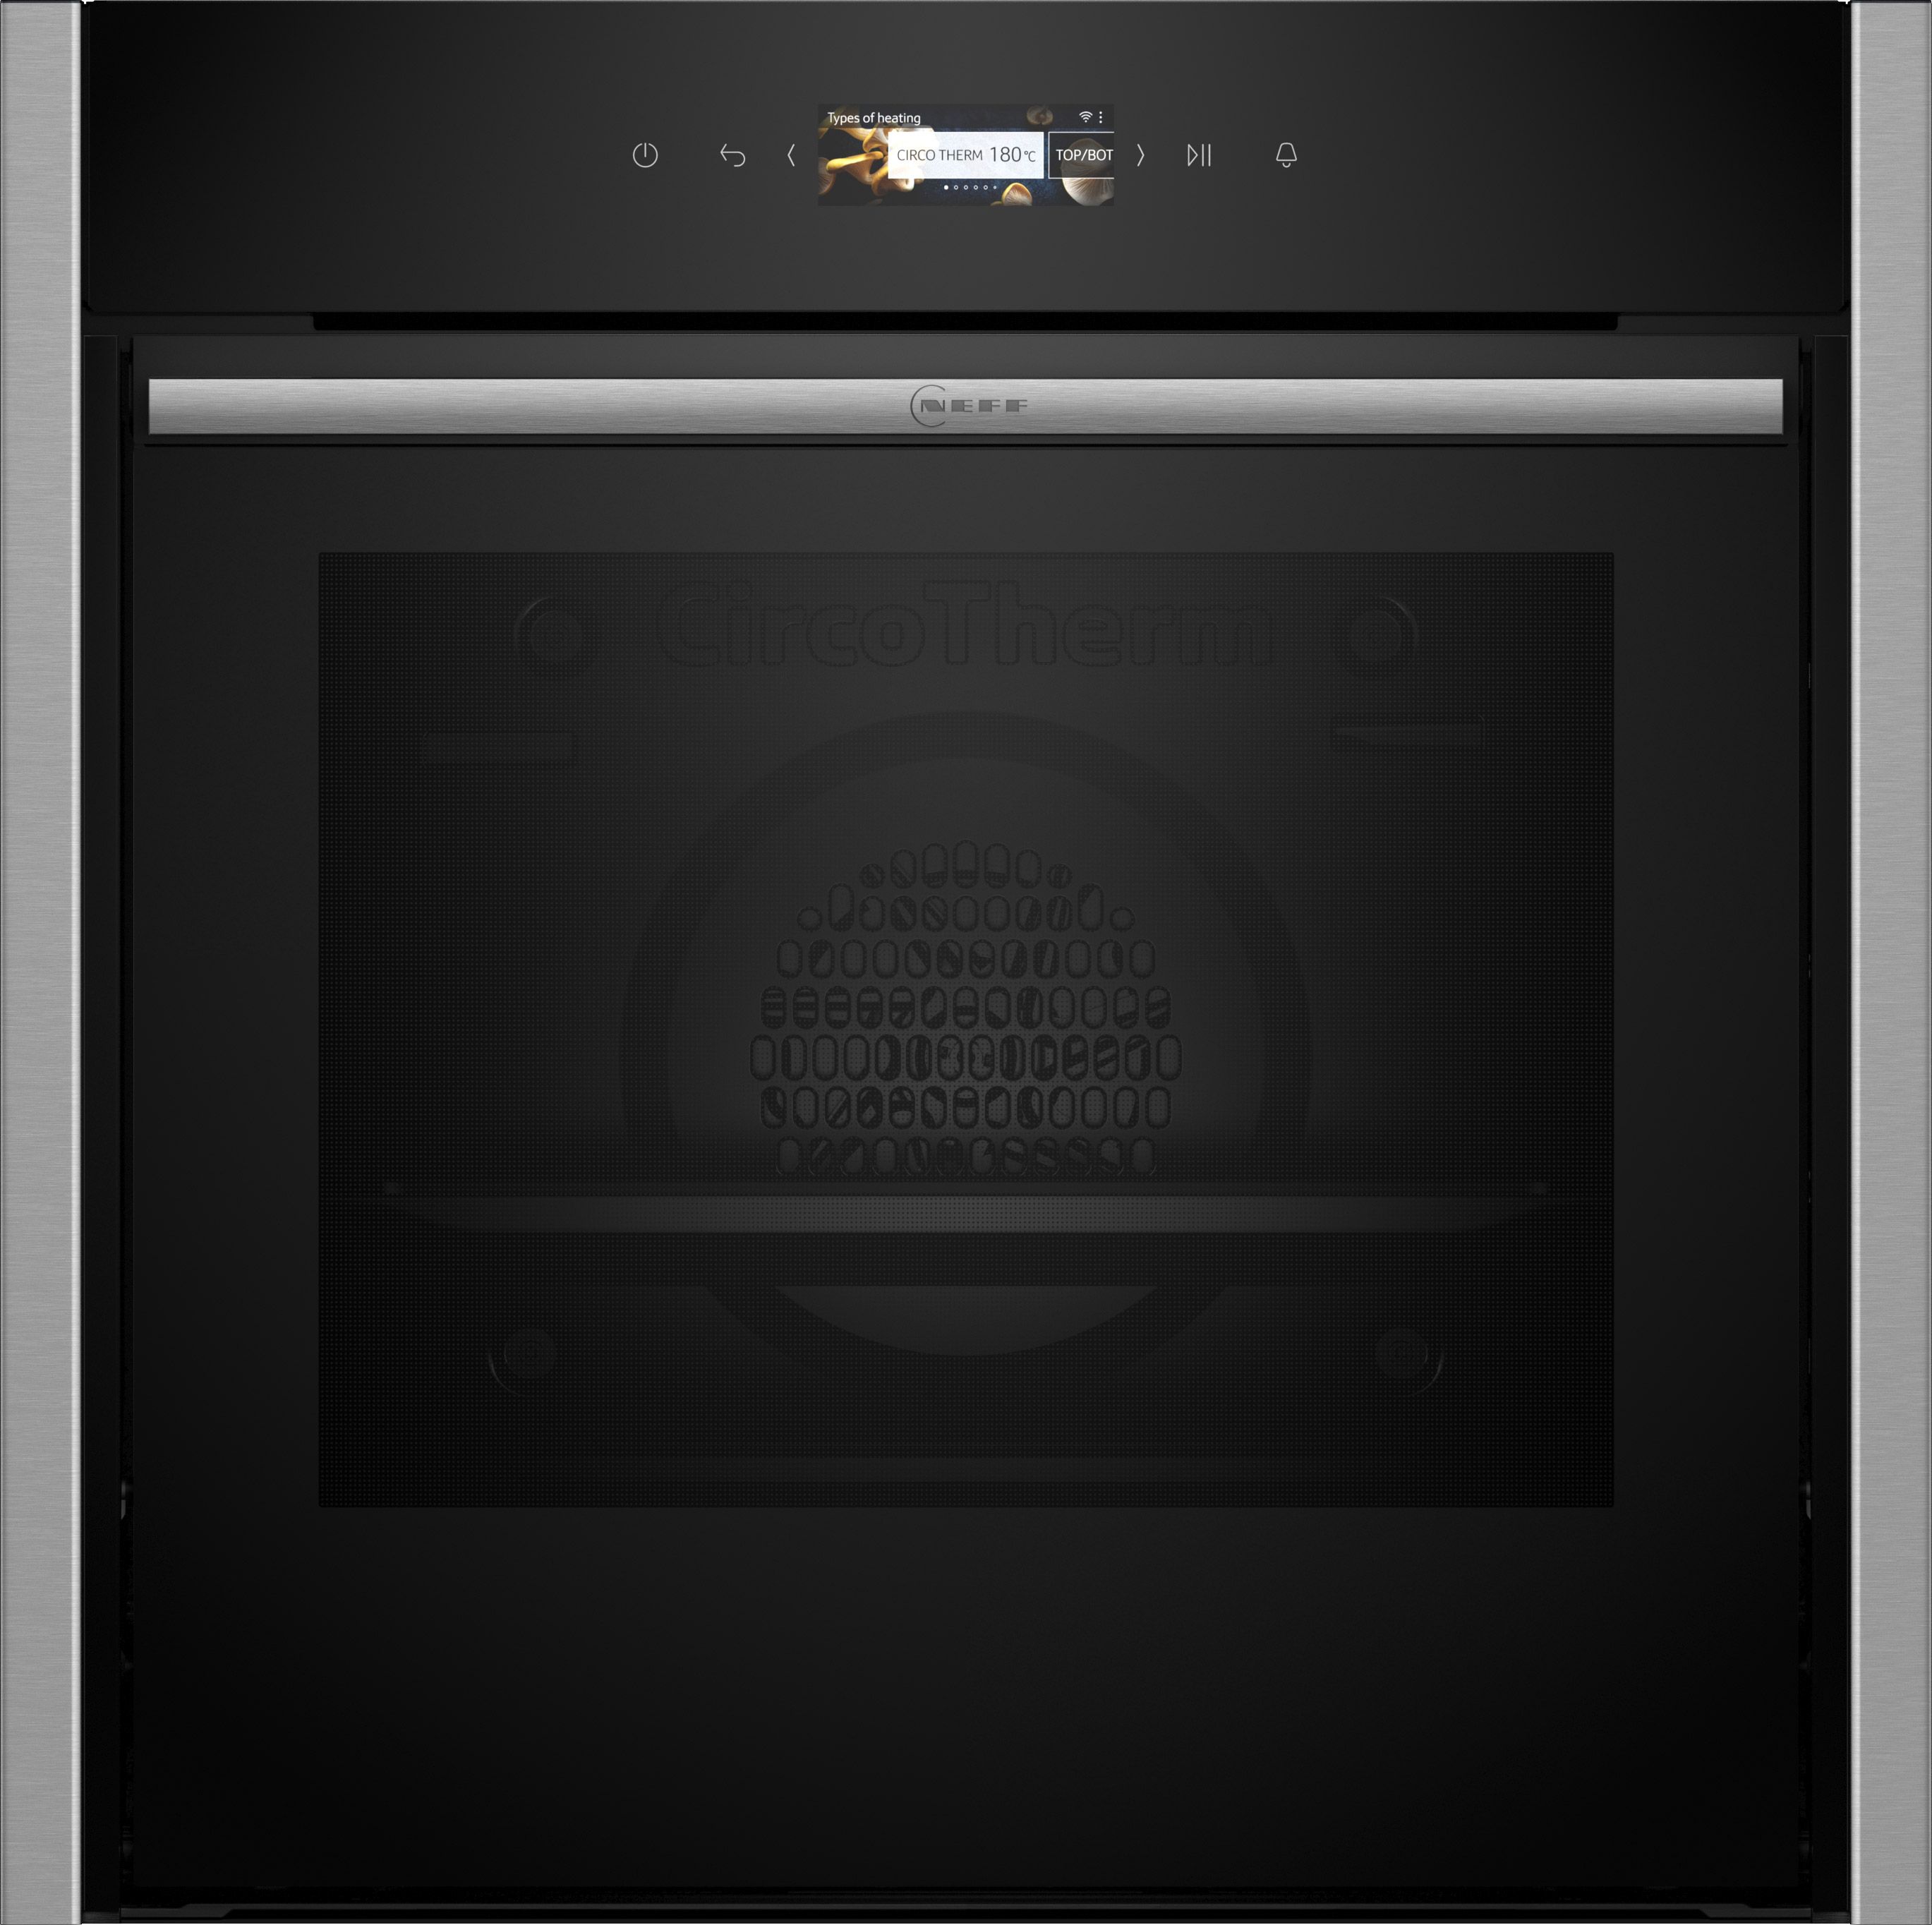 NEFF N70 Slide&Hide B54CR71N0B Built In Electric Single Oven and Pyrolytic Cleaning - Stainless Steel - A+ Rated, Stainless Steel